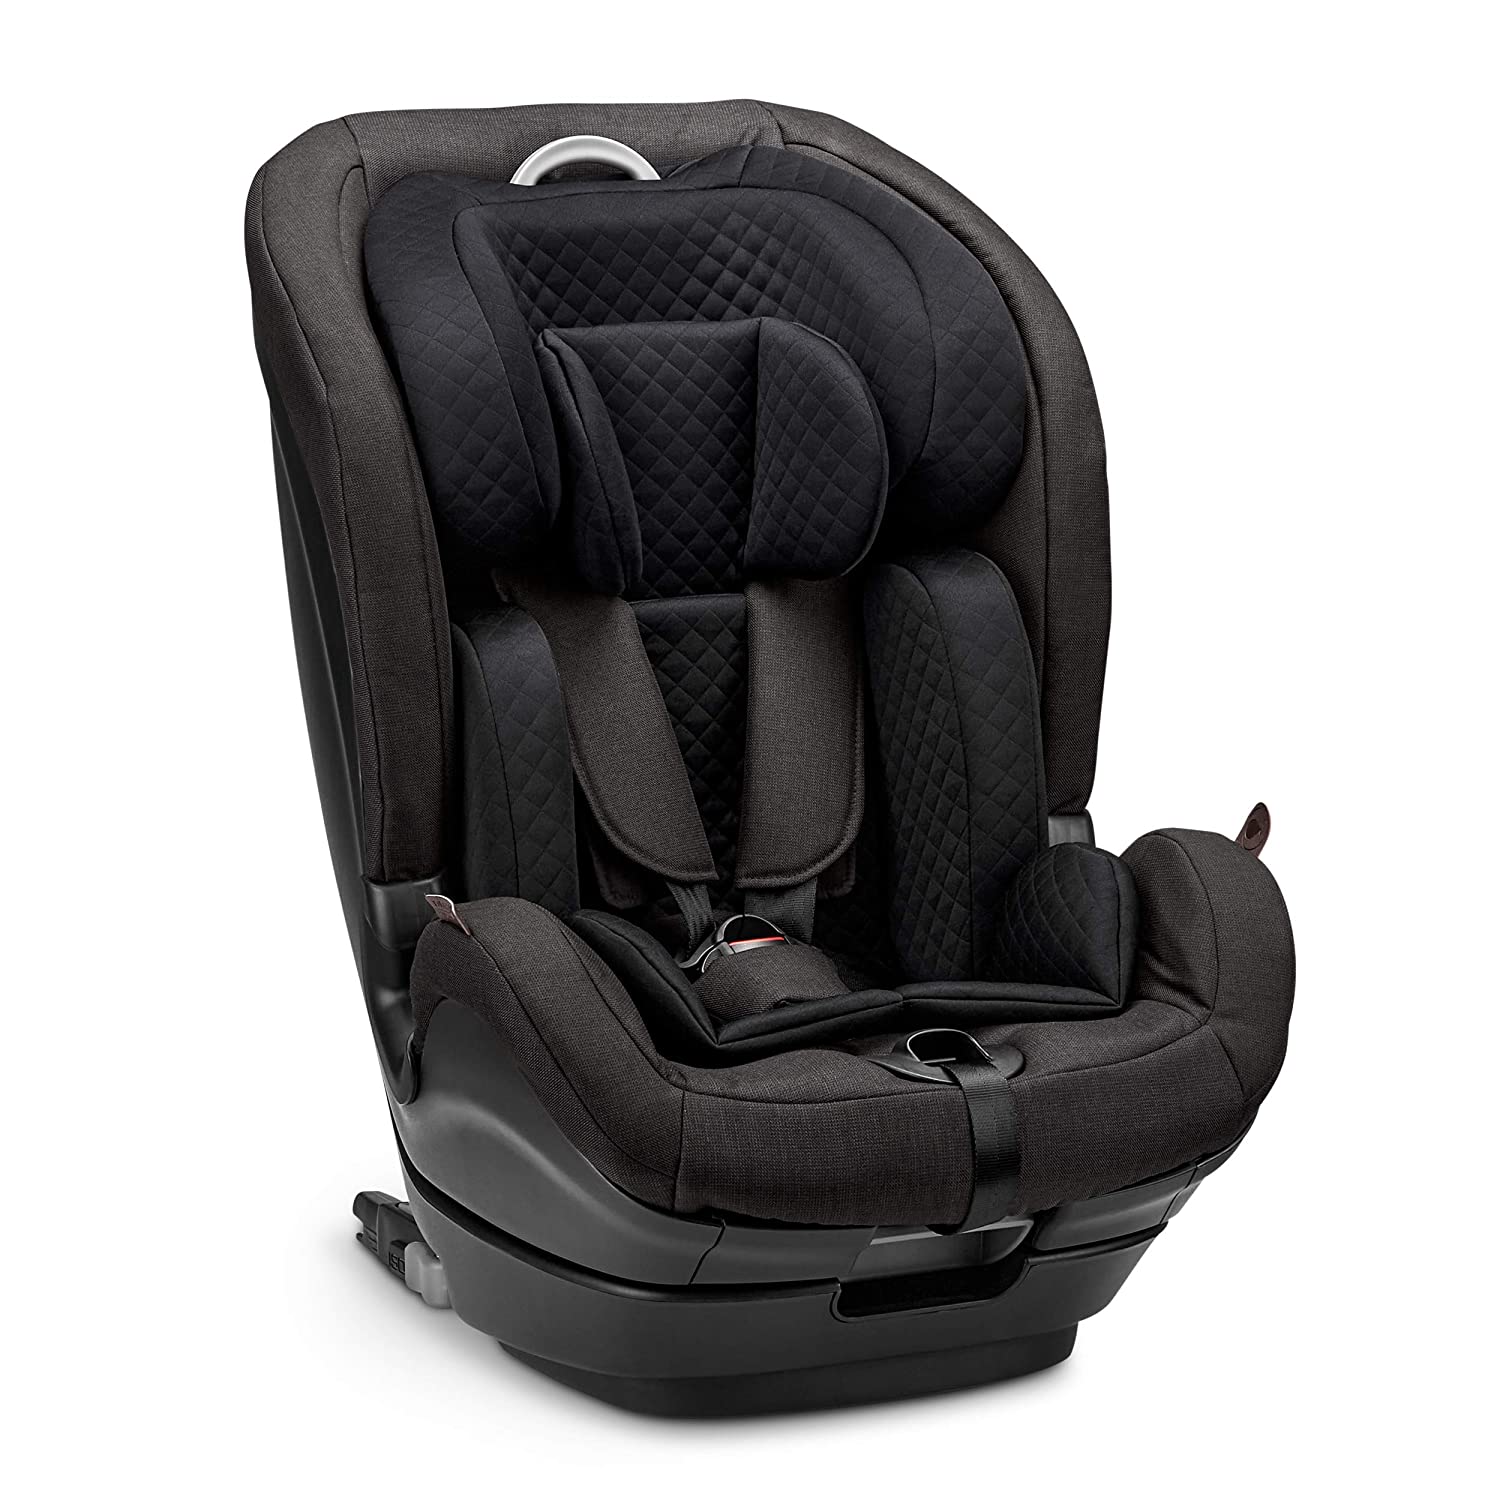 ABC Design Aspen i-Size Diamond Edition Child Car Seat for Children with 76-150 cm (from 15 months to 12 years) Isofix Attachment Secure Side Impact Protection Colour: Black